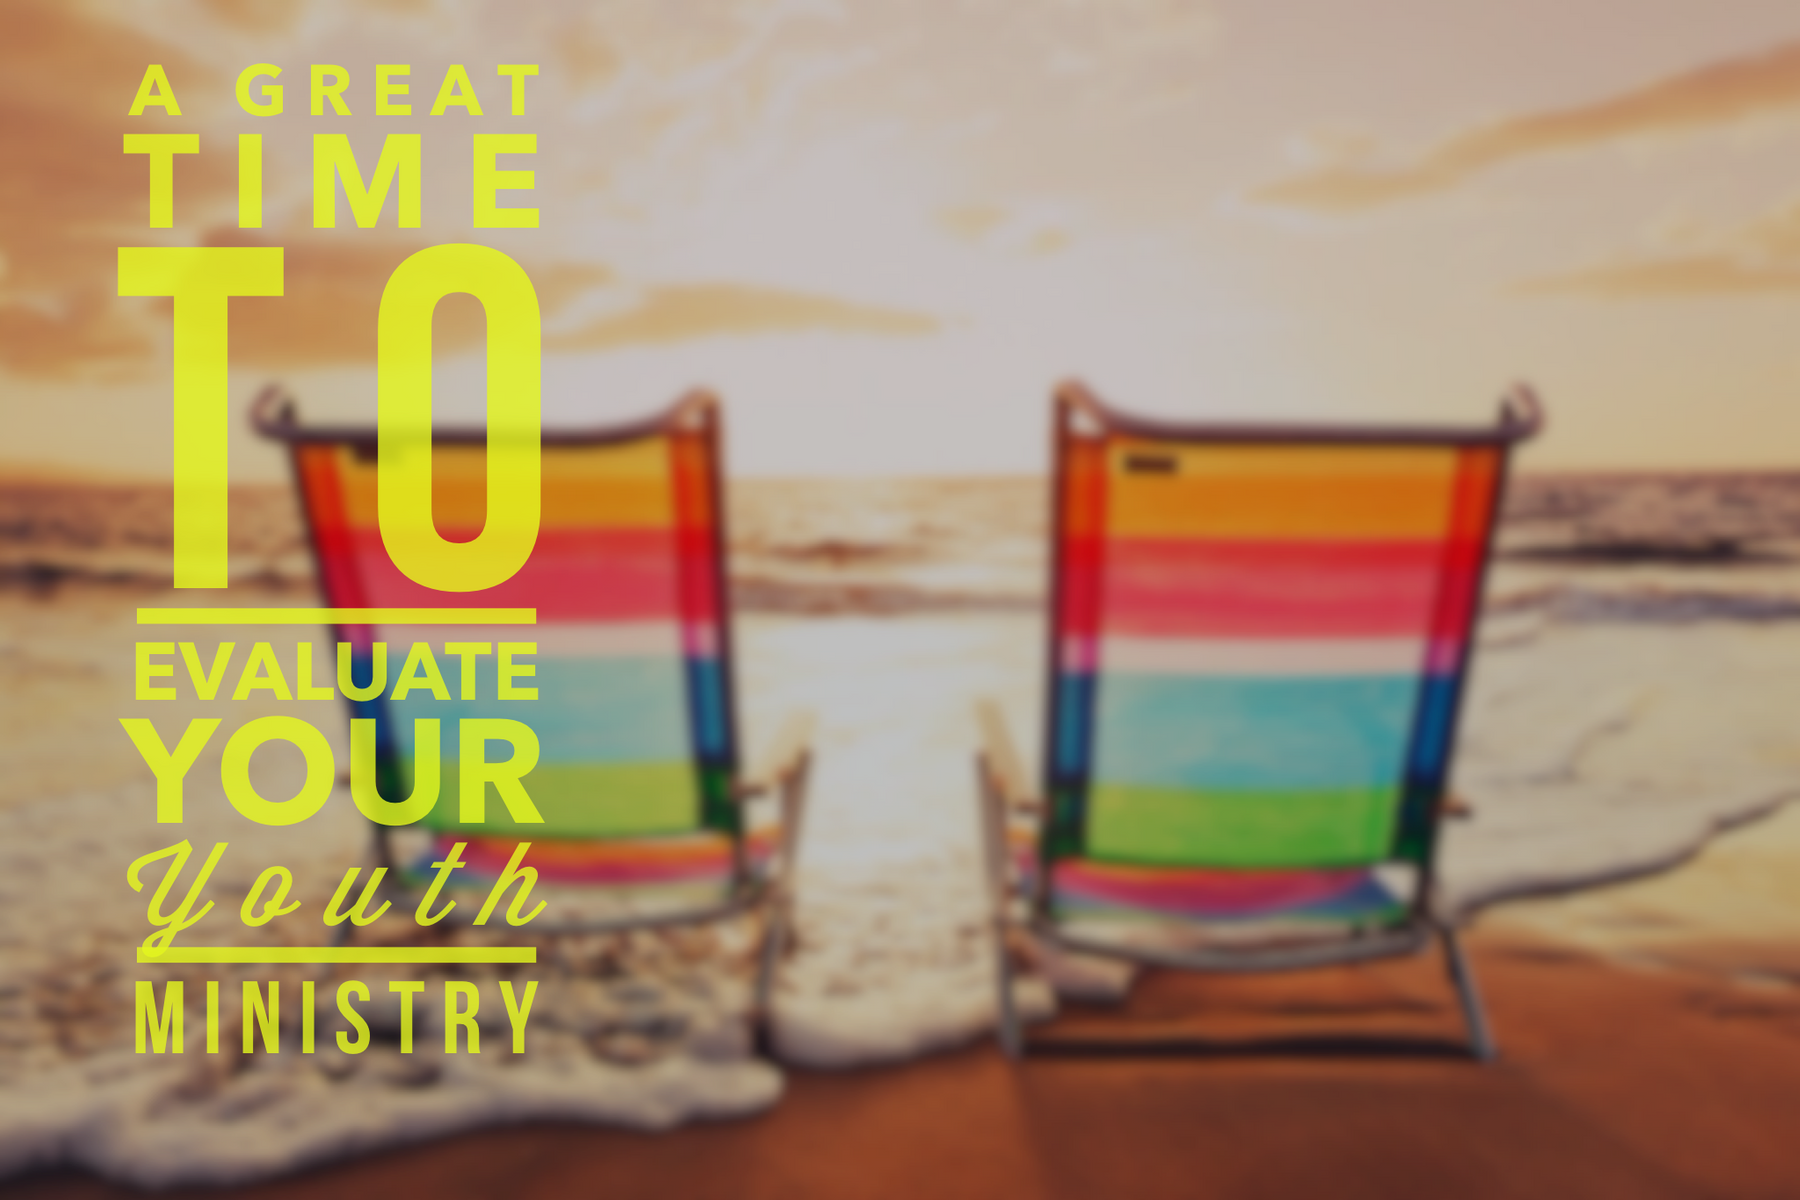 Summertime: The Perfect Time To Evaluate Your Youth Ministry!